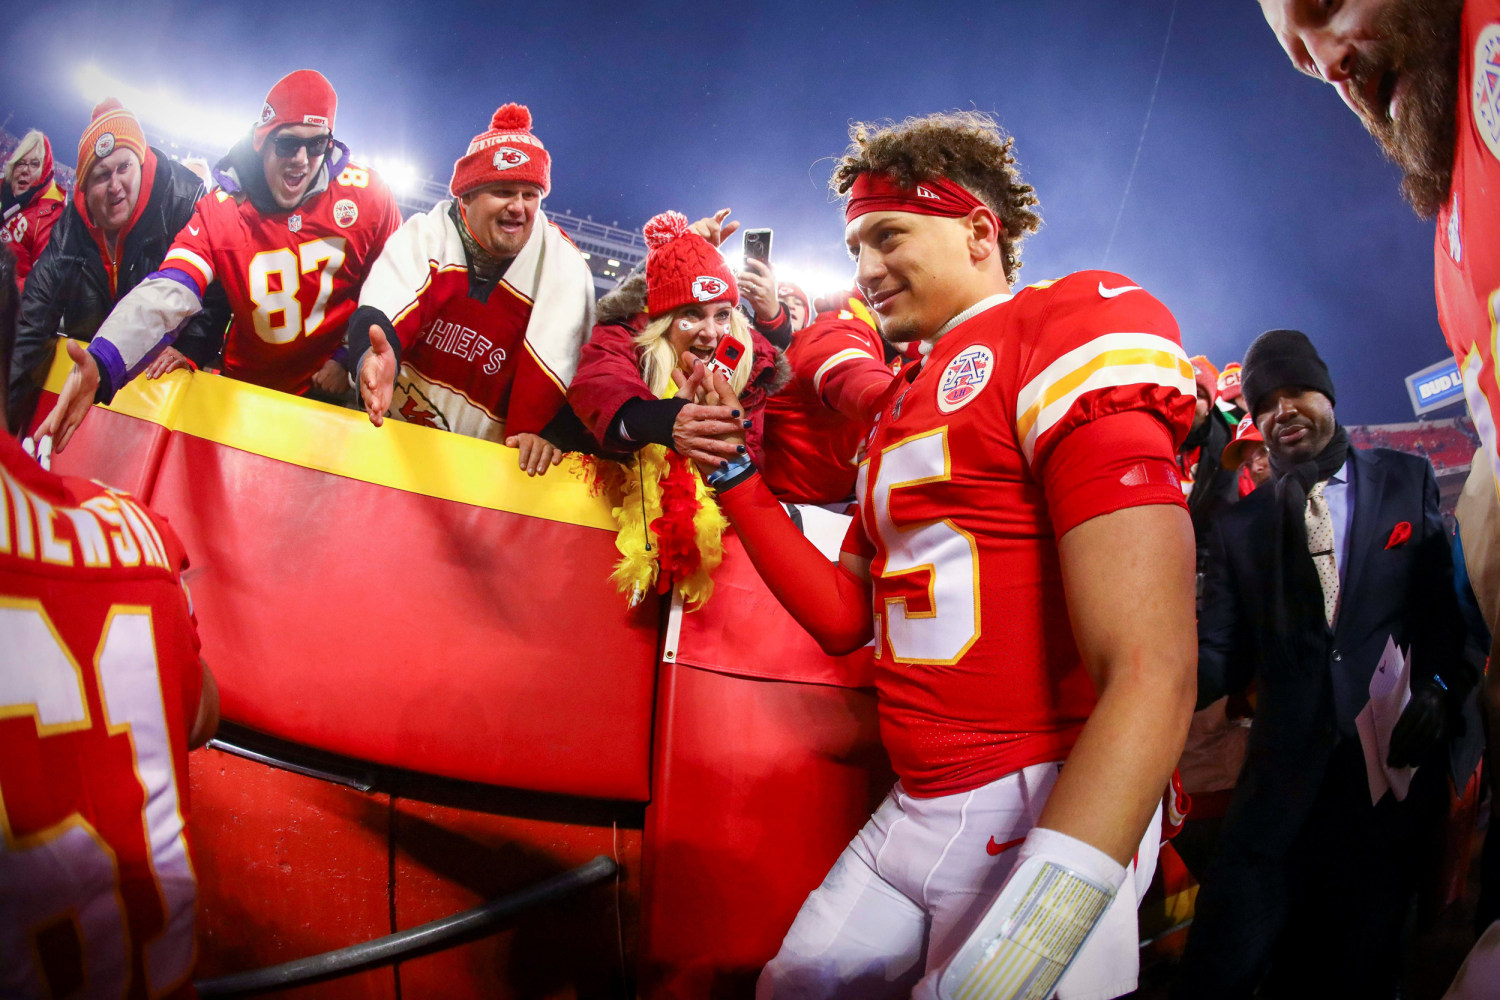 Kansas City Chiefs beg 'bad luck' fan to stay home for AFC championship game